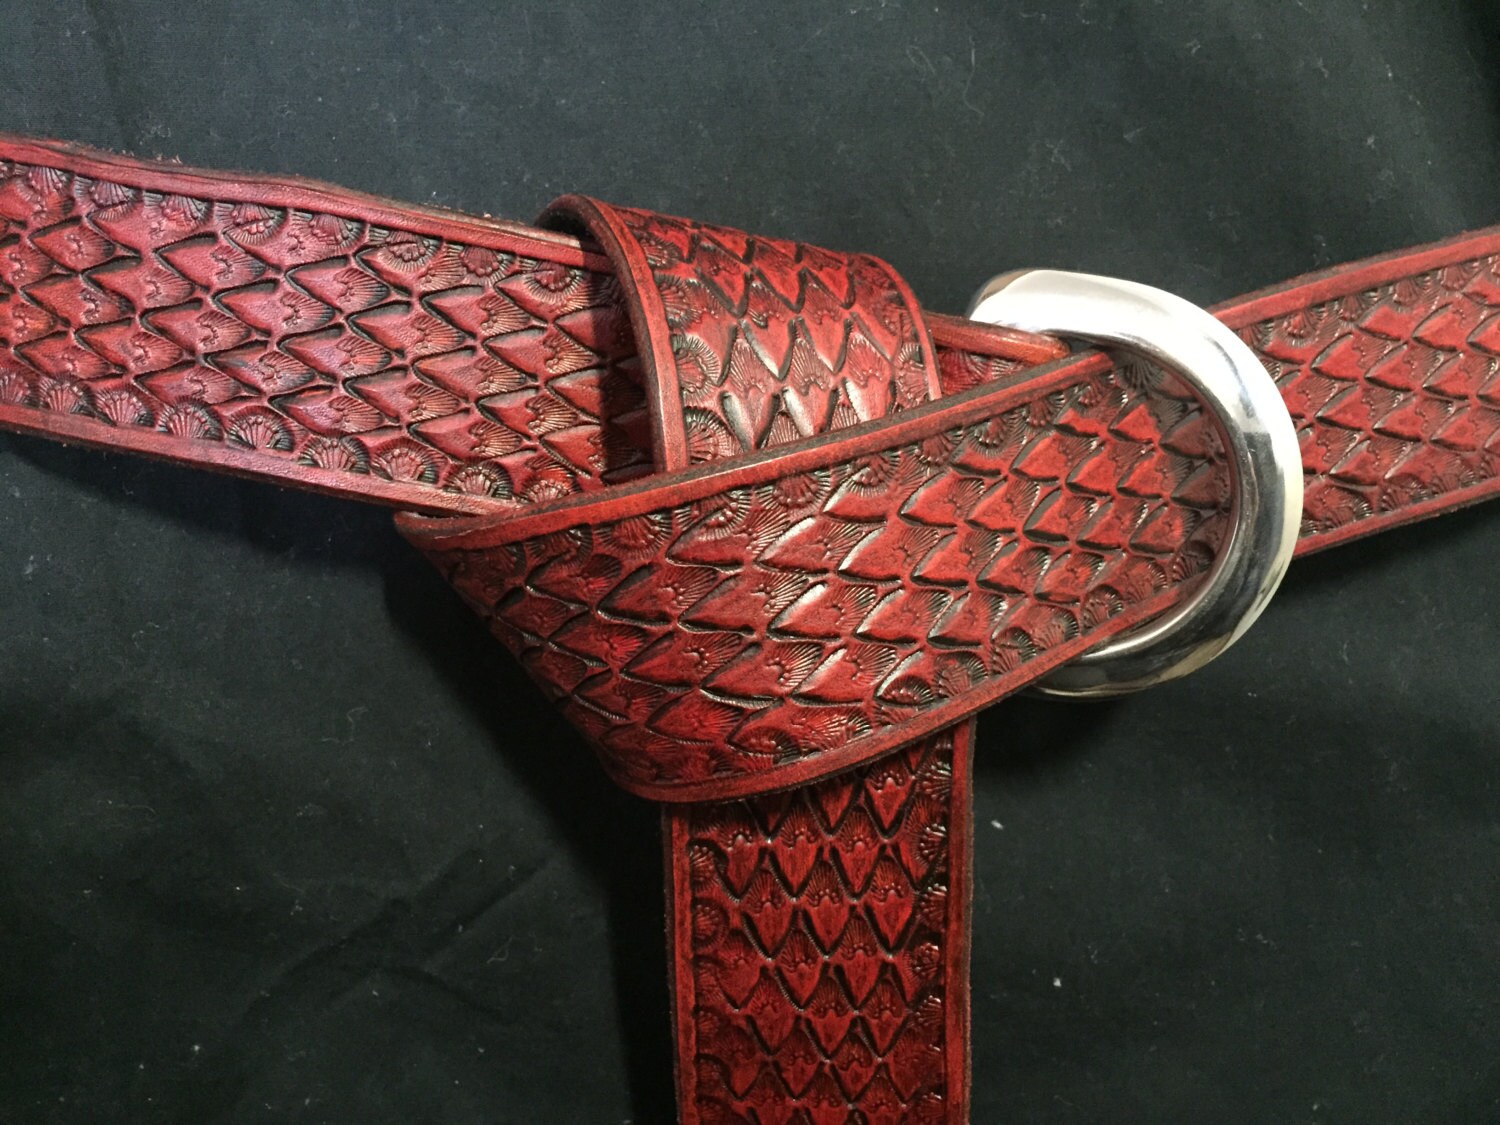 Dragon Scale Red Long Belt by CallirLeatherworks on Etsy